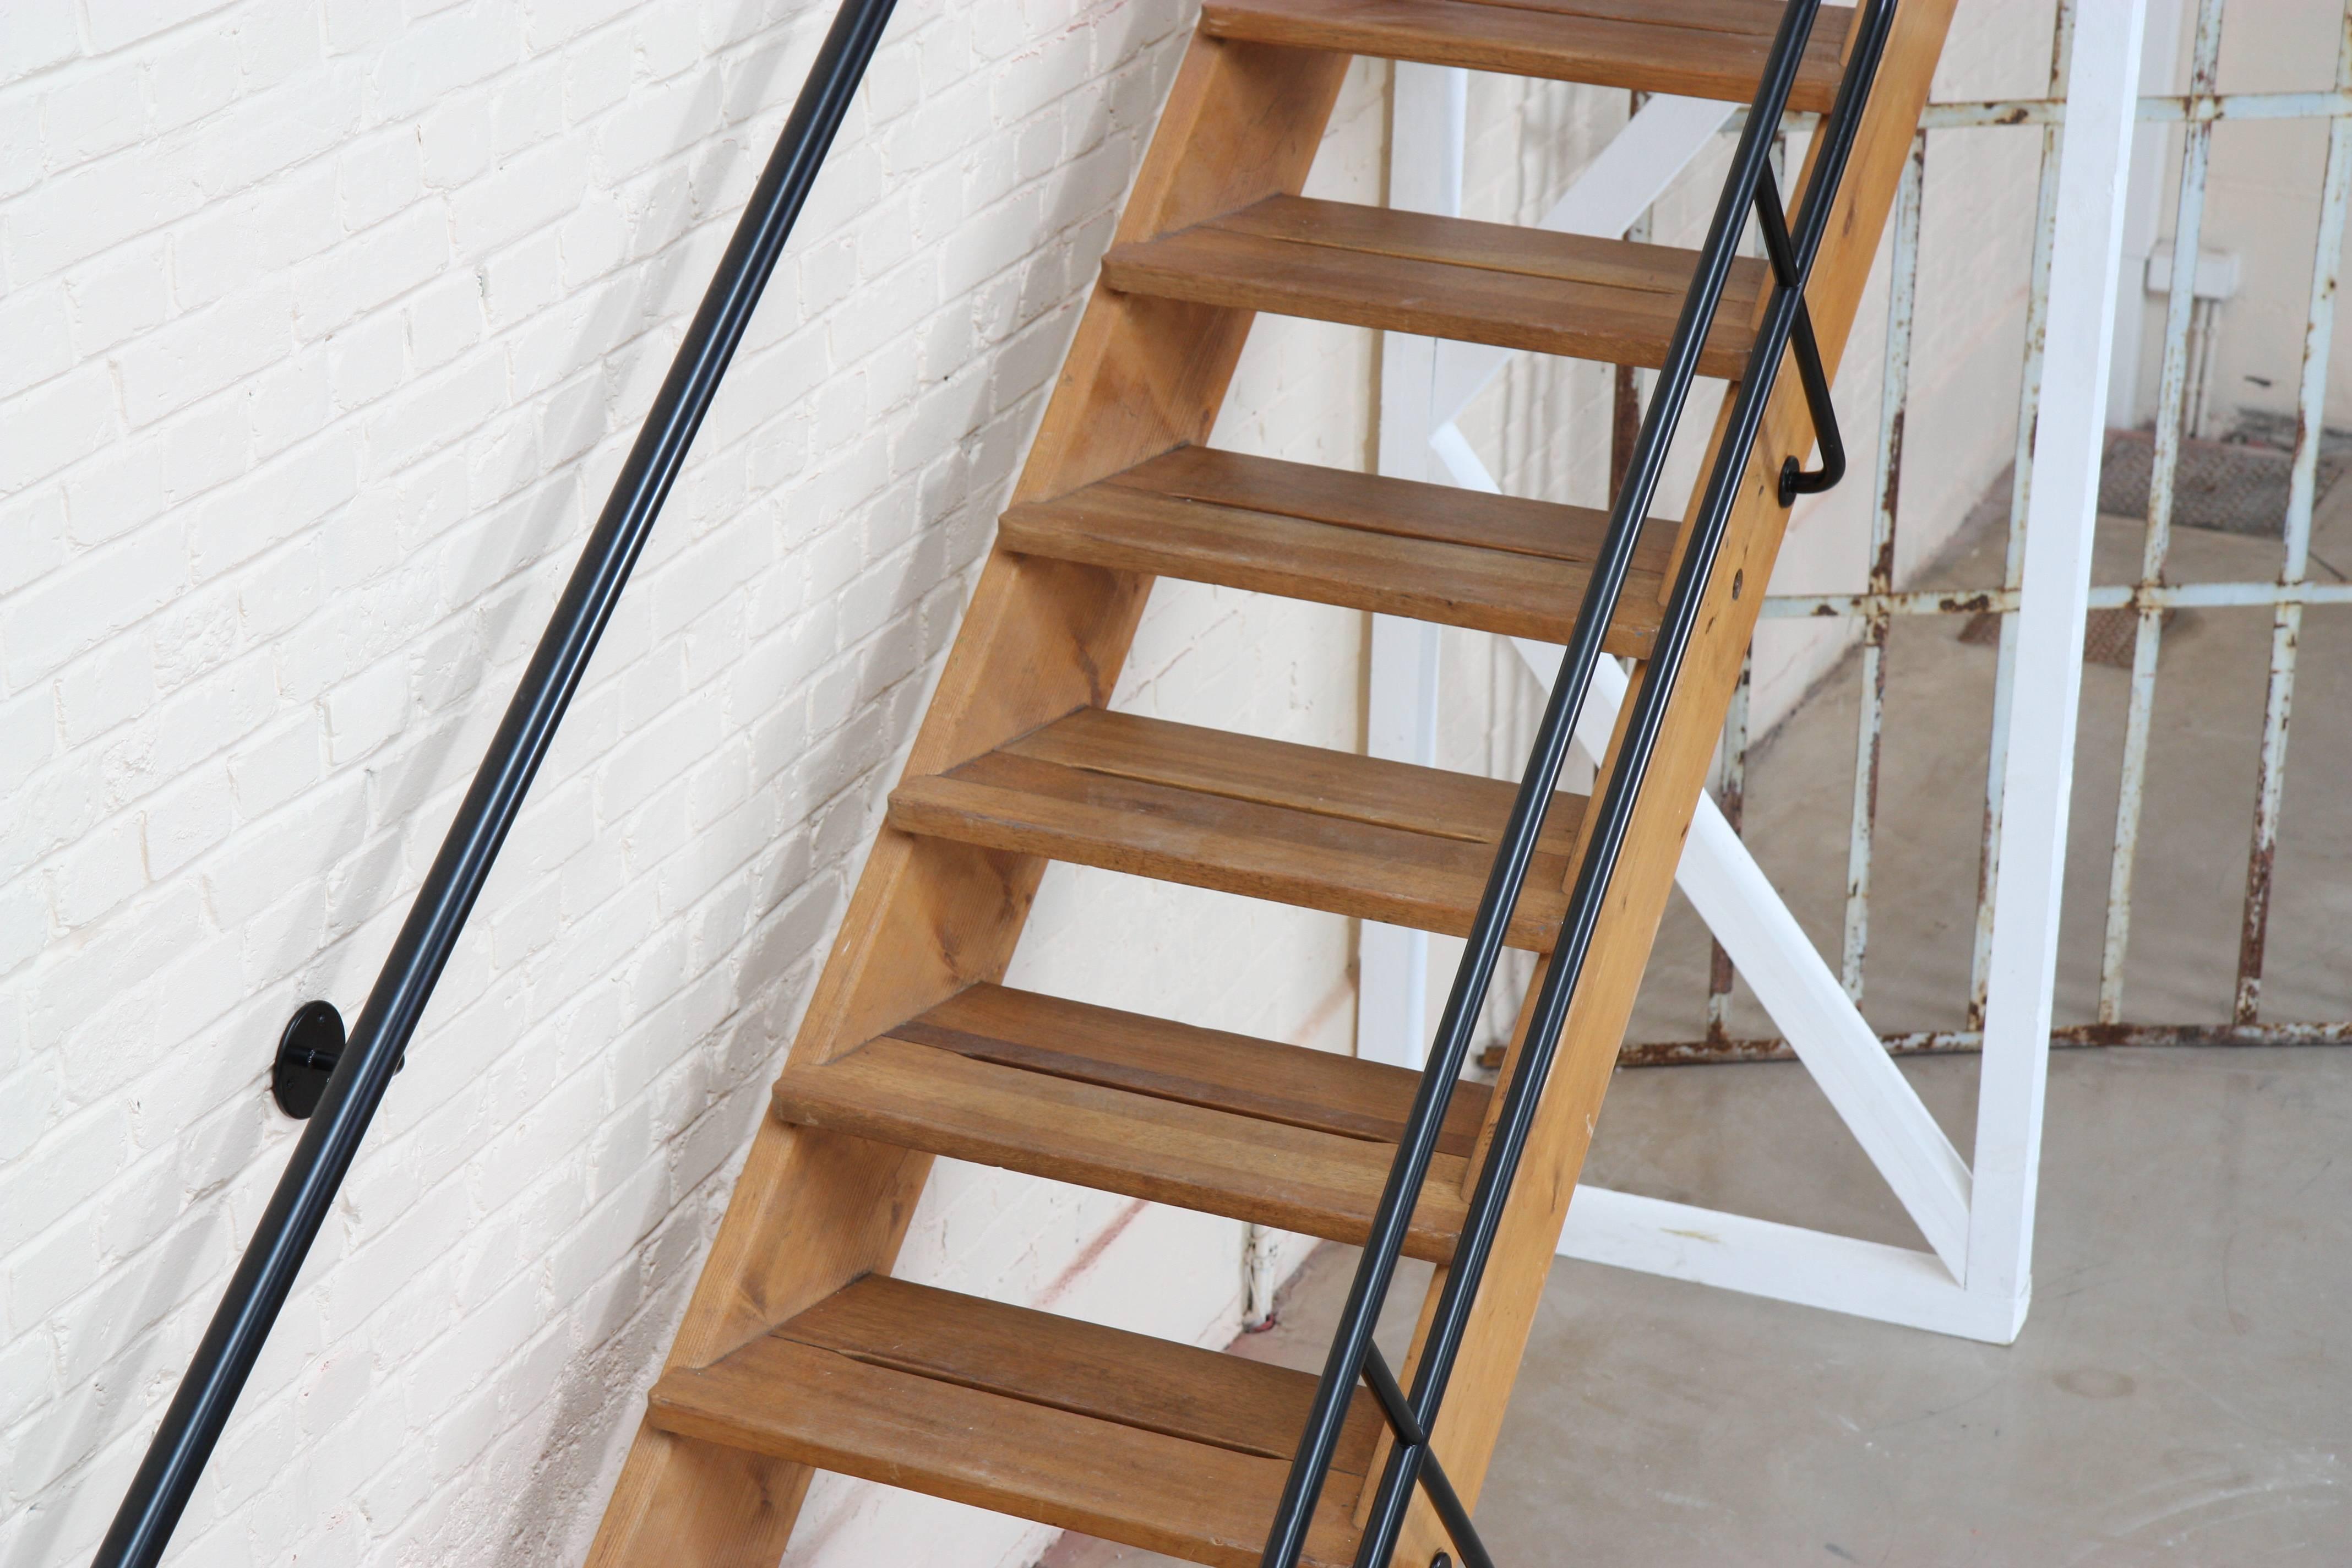 Larch uprights, eleven steps in exotic wood. Ramps in black lacquered metal made by Jean Prouvé workshop.
Restoration of use and maintenance on the ramps.
Provenance: Housing unit, Briey en Forêt.

The staircase, identical in each duplex, is the